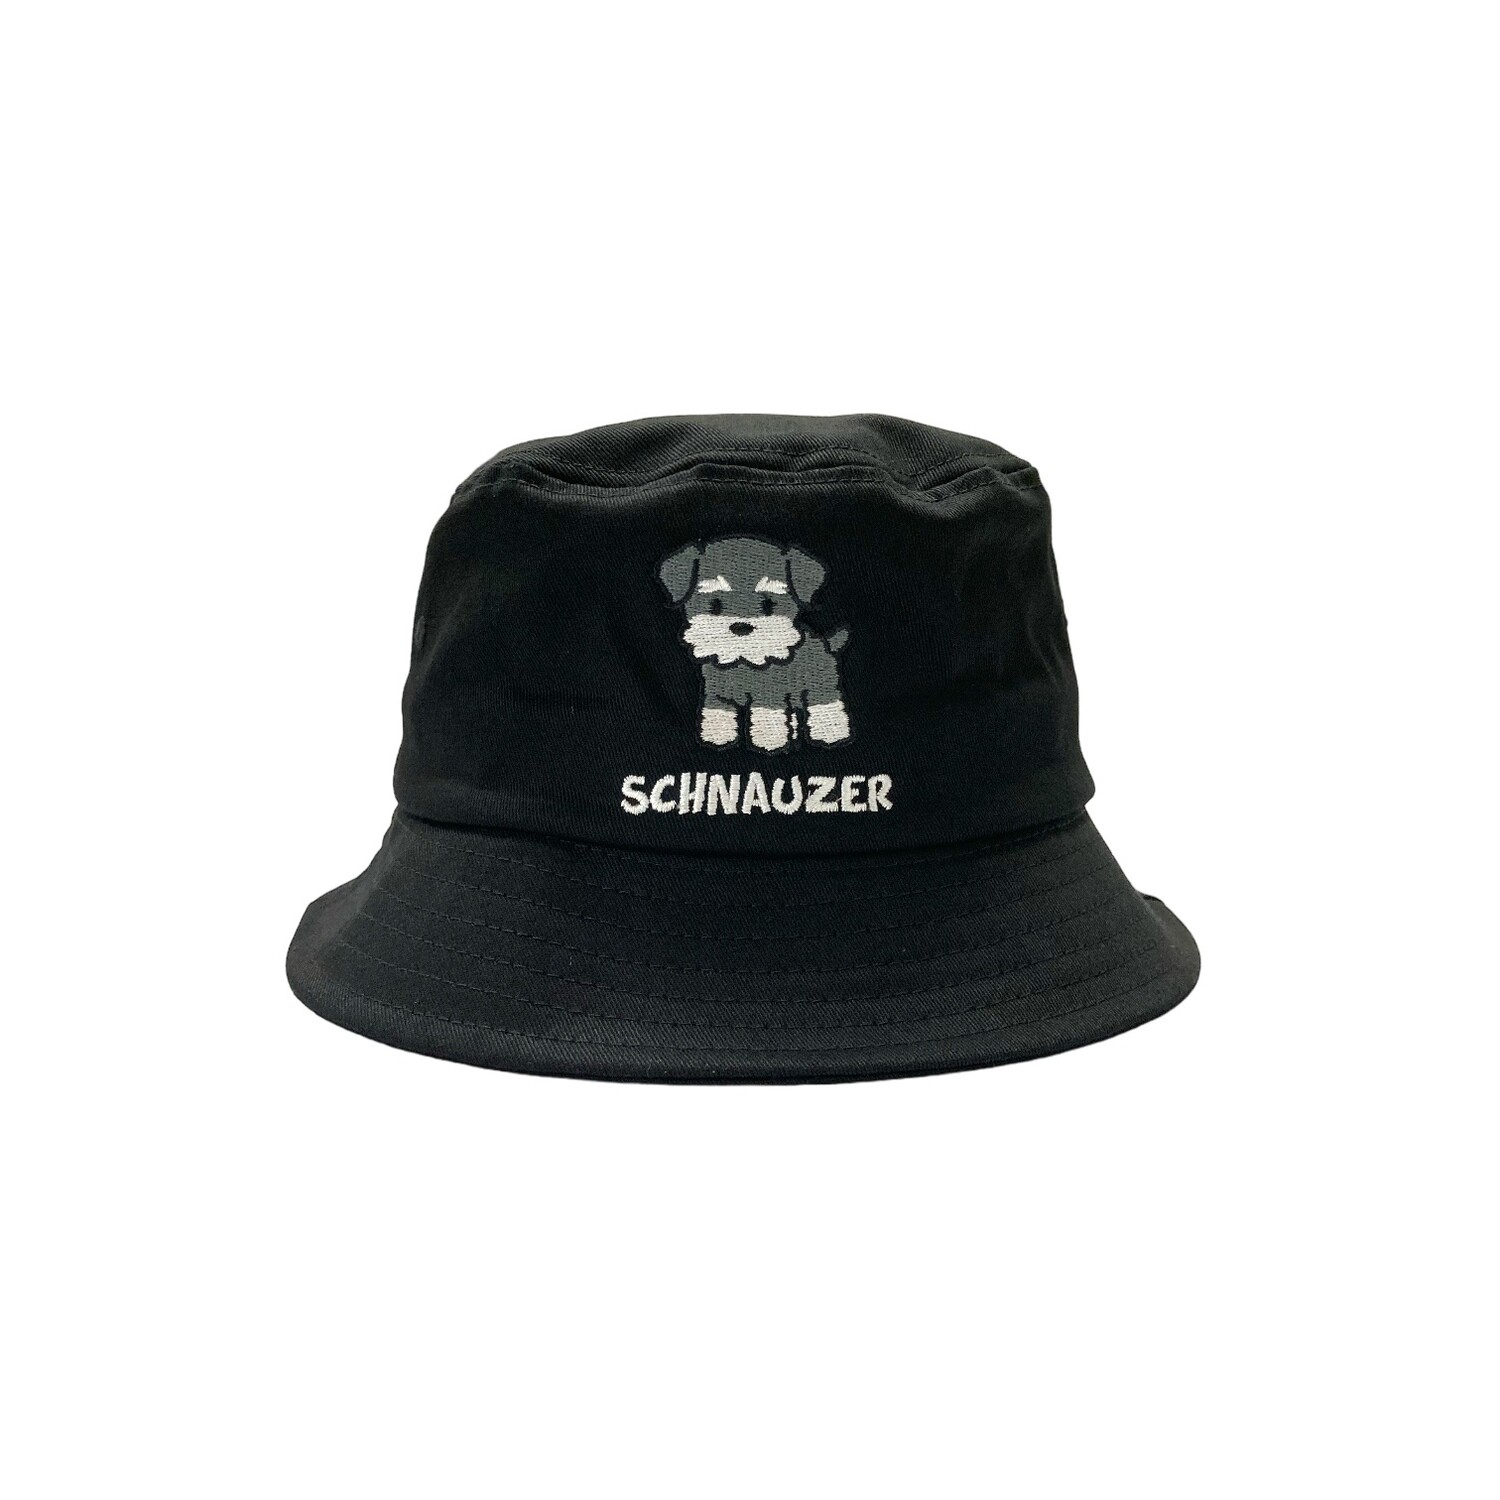 Schnauzer Embroidery Bucket Hat, Color: Black, Size: Free Size (56-58cm)